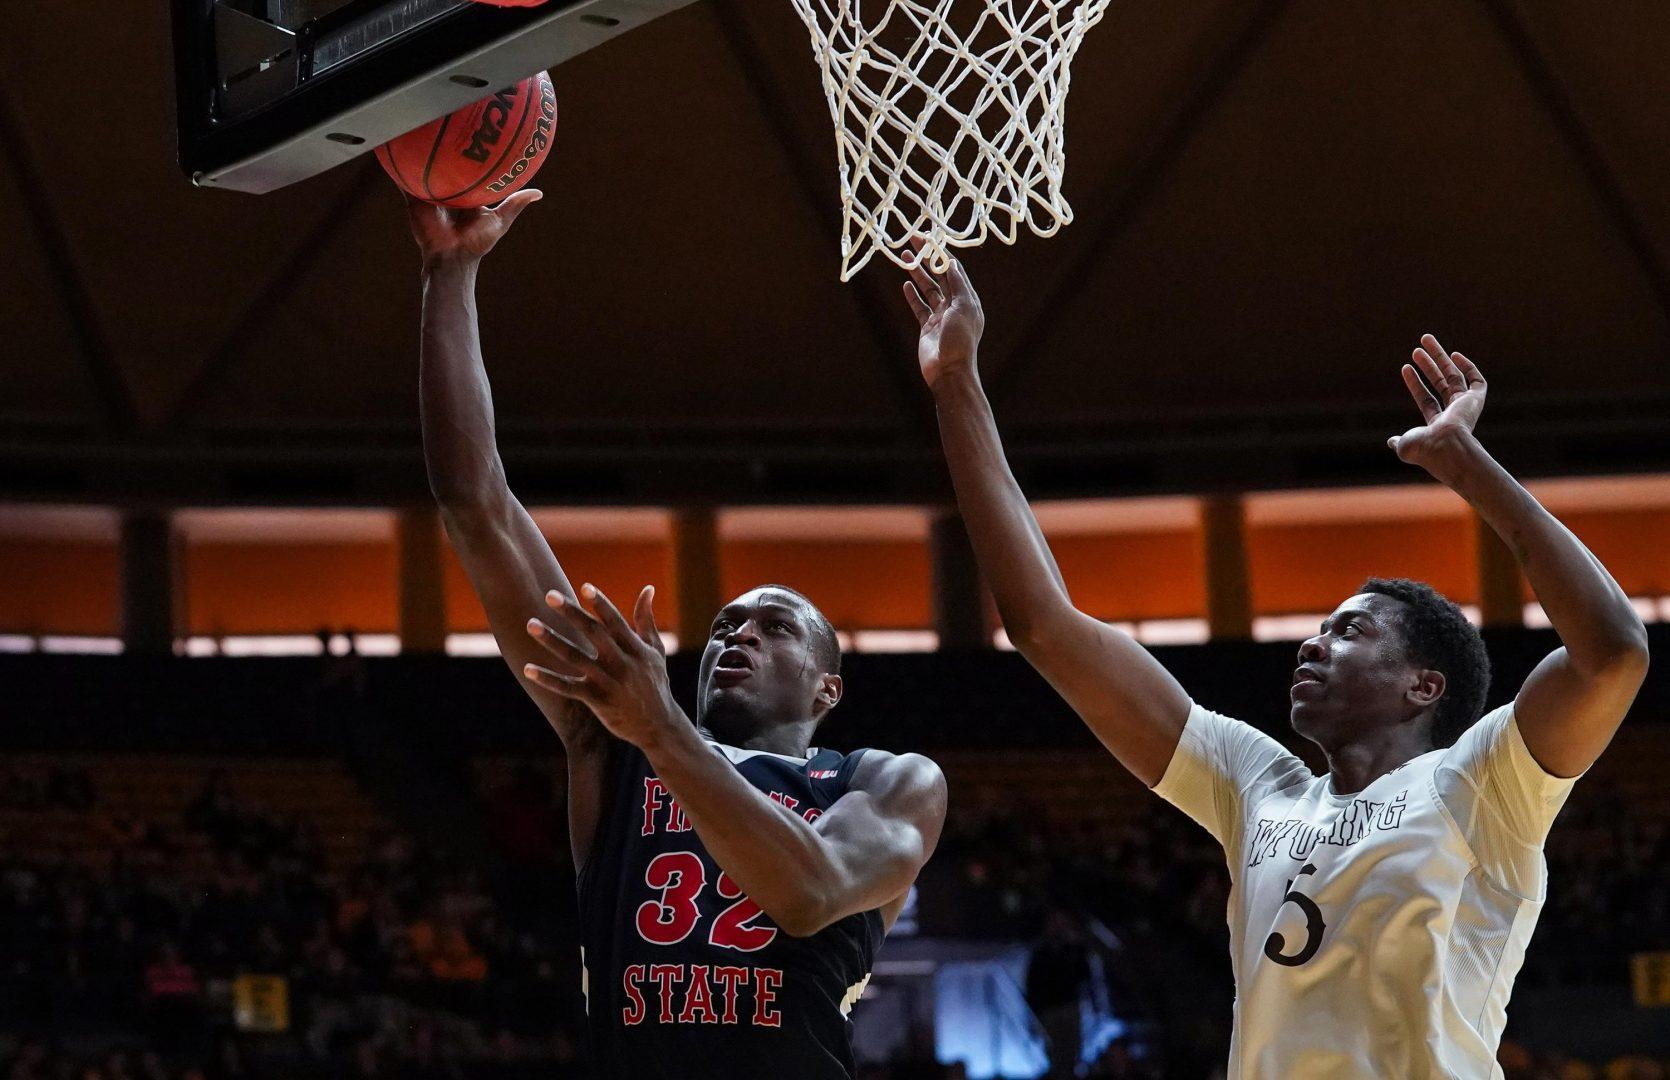 Fresno State forward Nate Grimes attempts a layup over Wyoming’s Alan Herndon on February 3, 2018 at the Arena-Auditorium. The ‘Dogs won 80-62. (Fresno State Athletics)